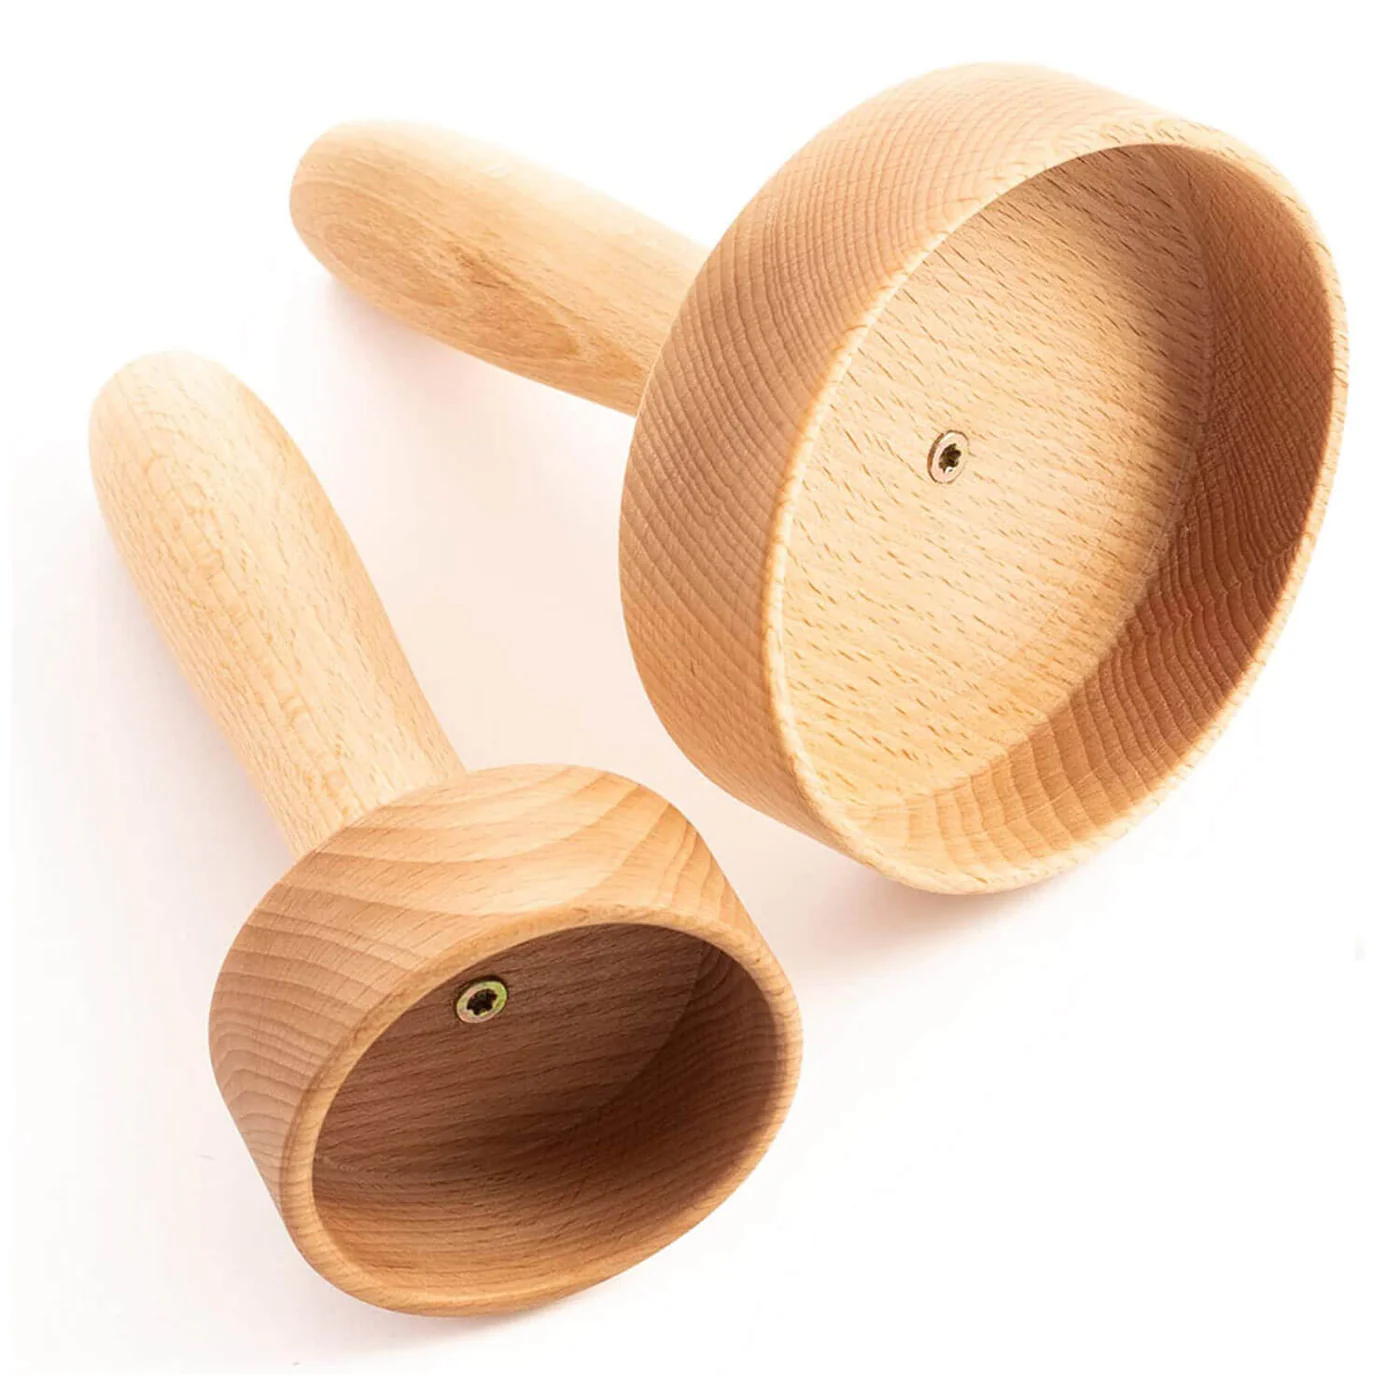 2 piece wooden massager cups set maderotherapy cellulite lymphatic drainage tuuli 189